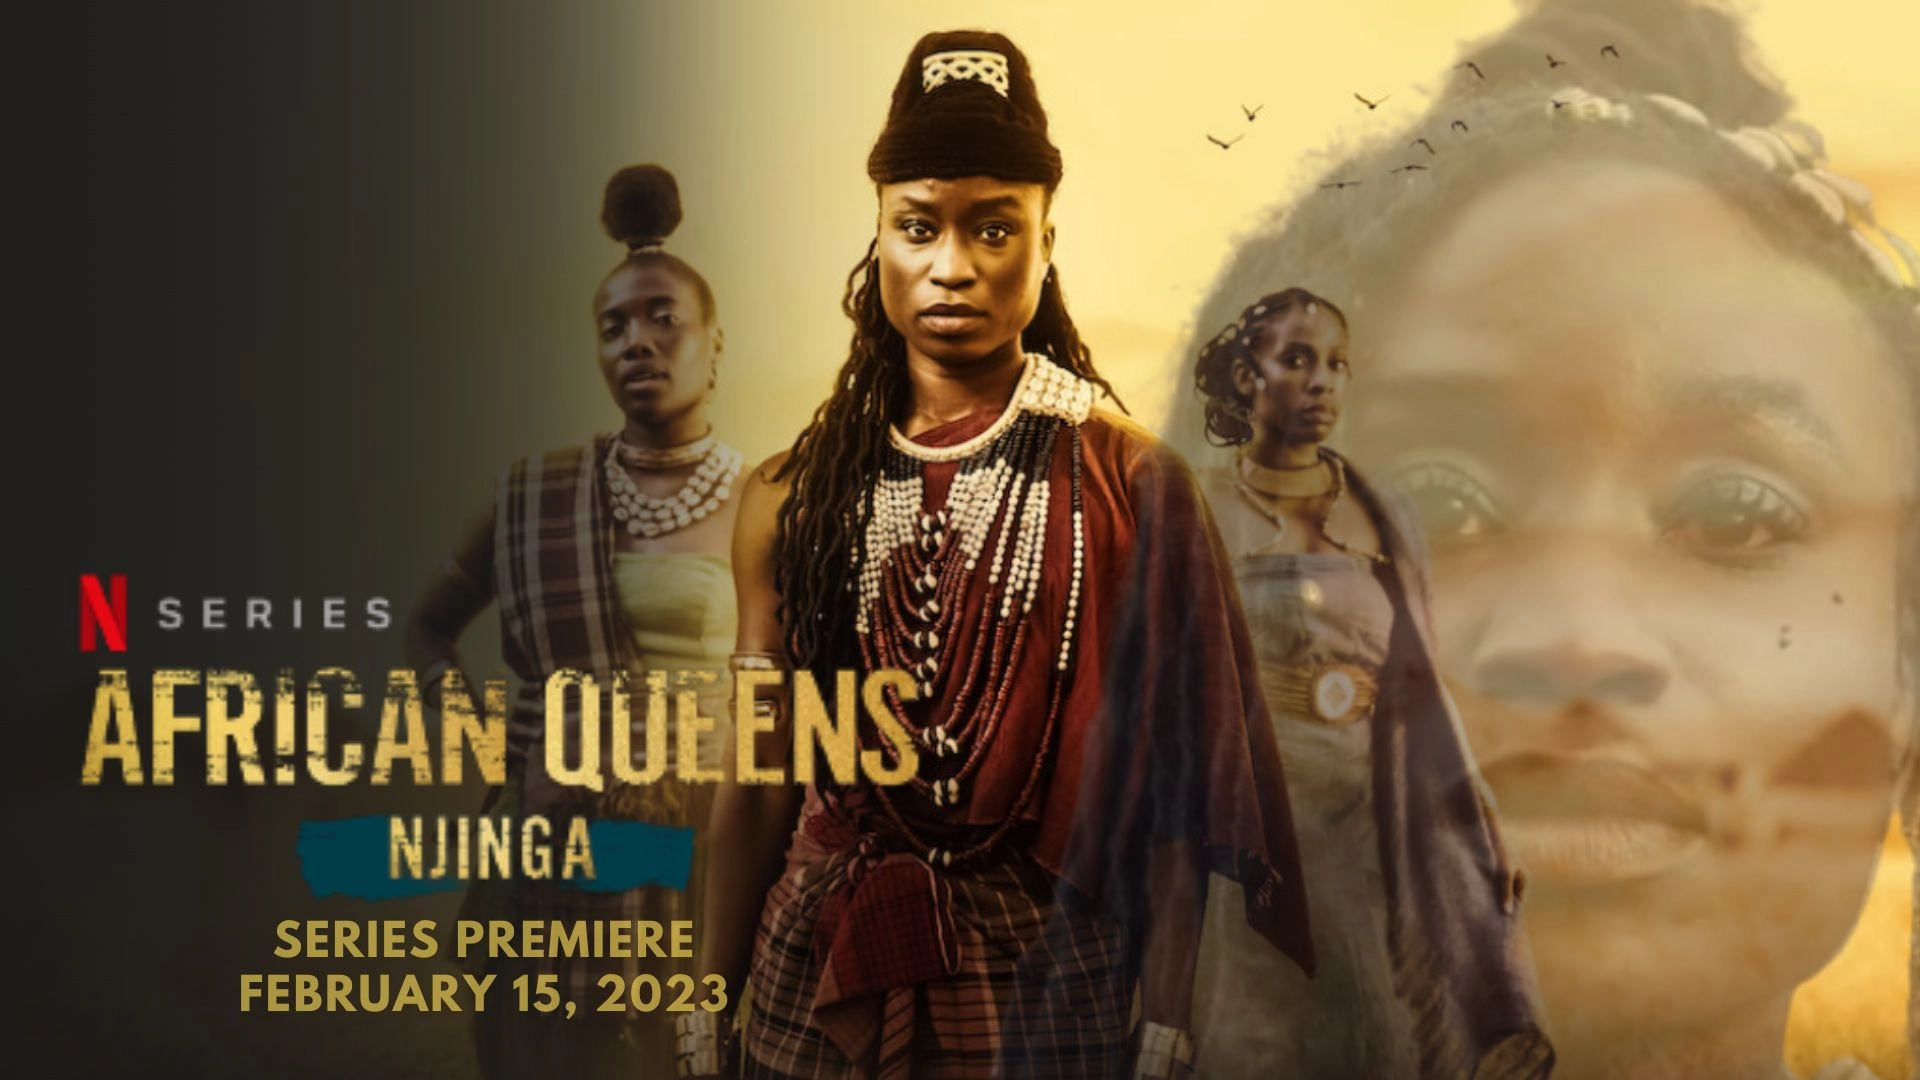 African Queens Njinga Parents Guide and Age Rating (2023)